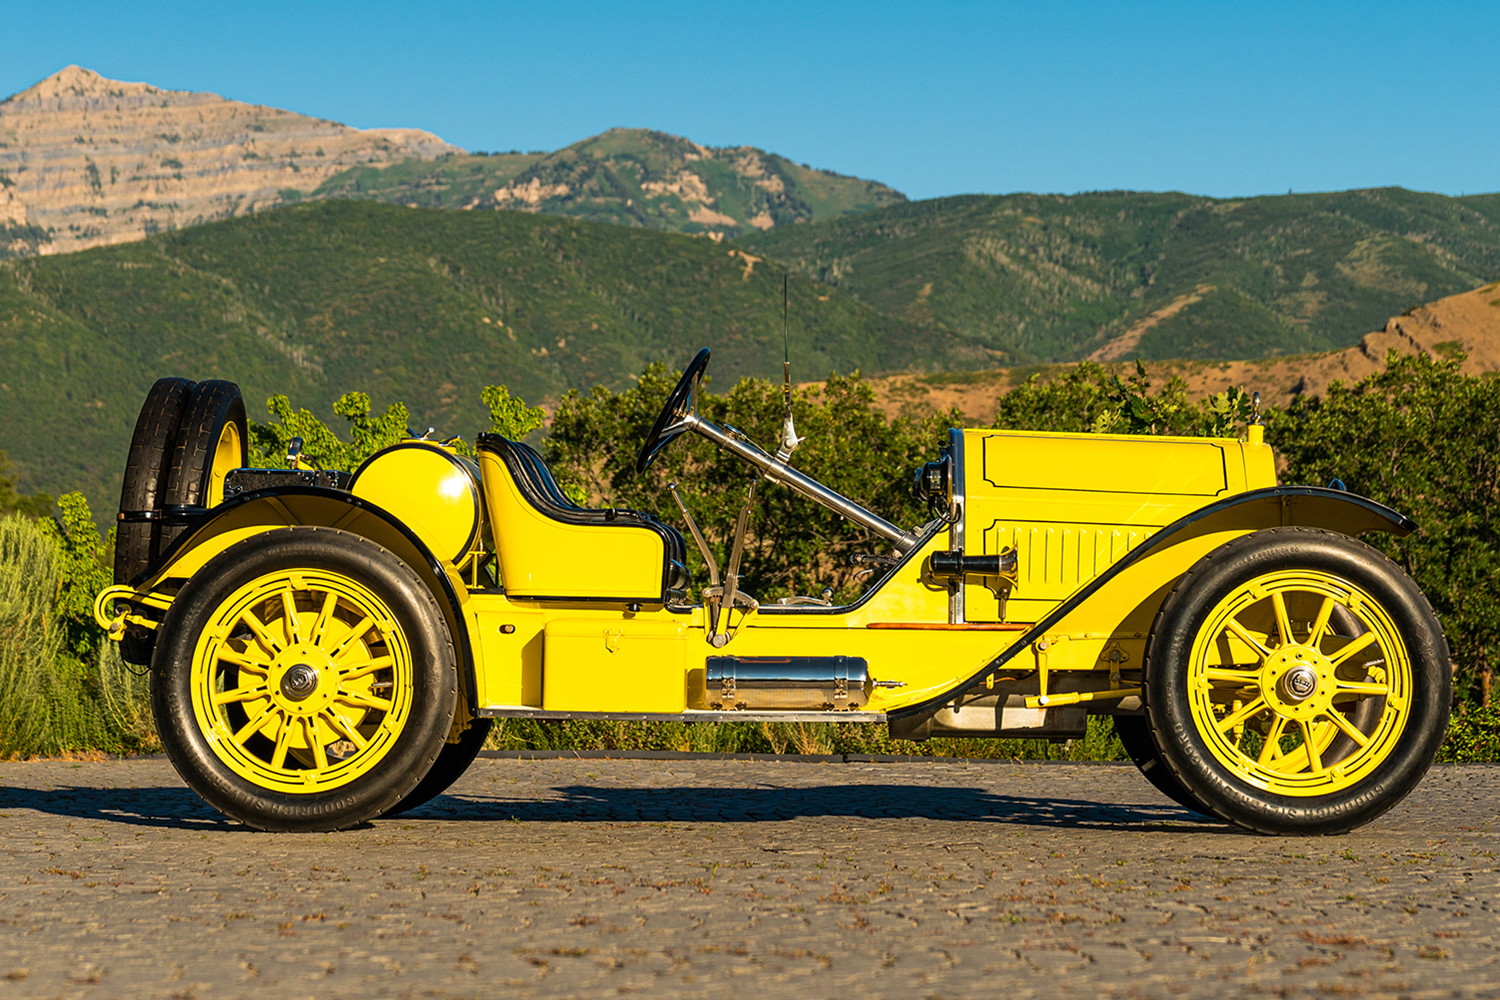 The profile of a yellow and black 1914 Stutz Bearcat, one of the original American sports cars, which will hit the auction block at Pebble Beach via Gooding & Company